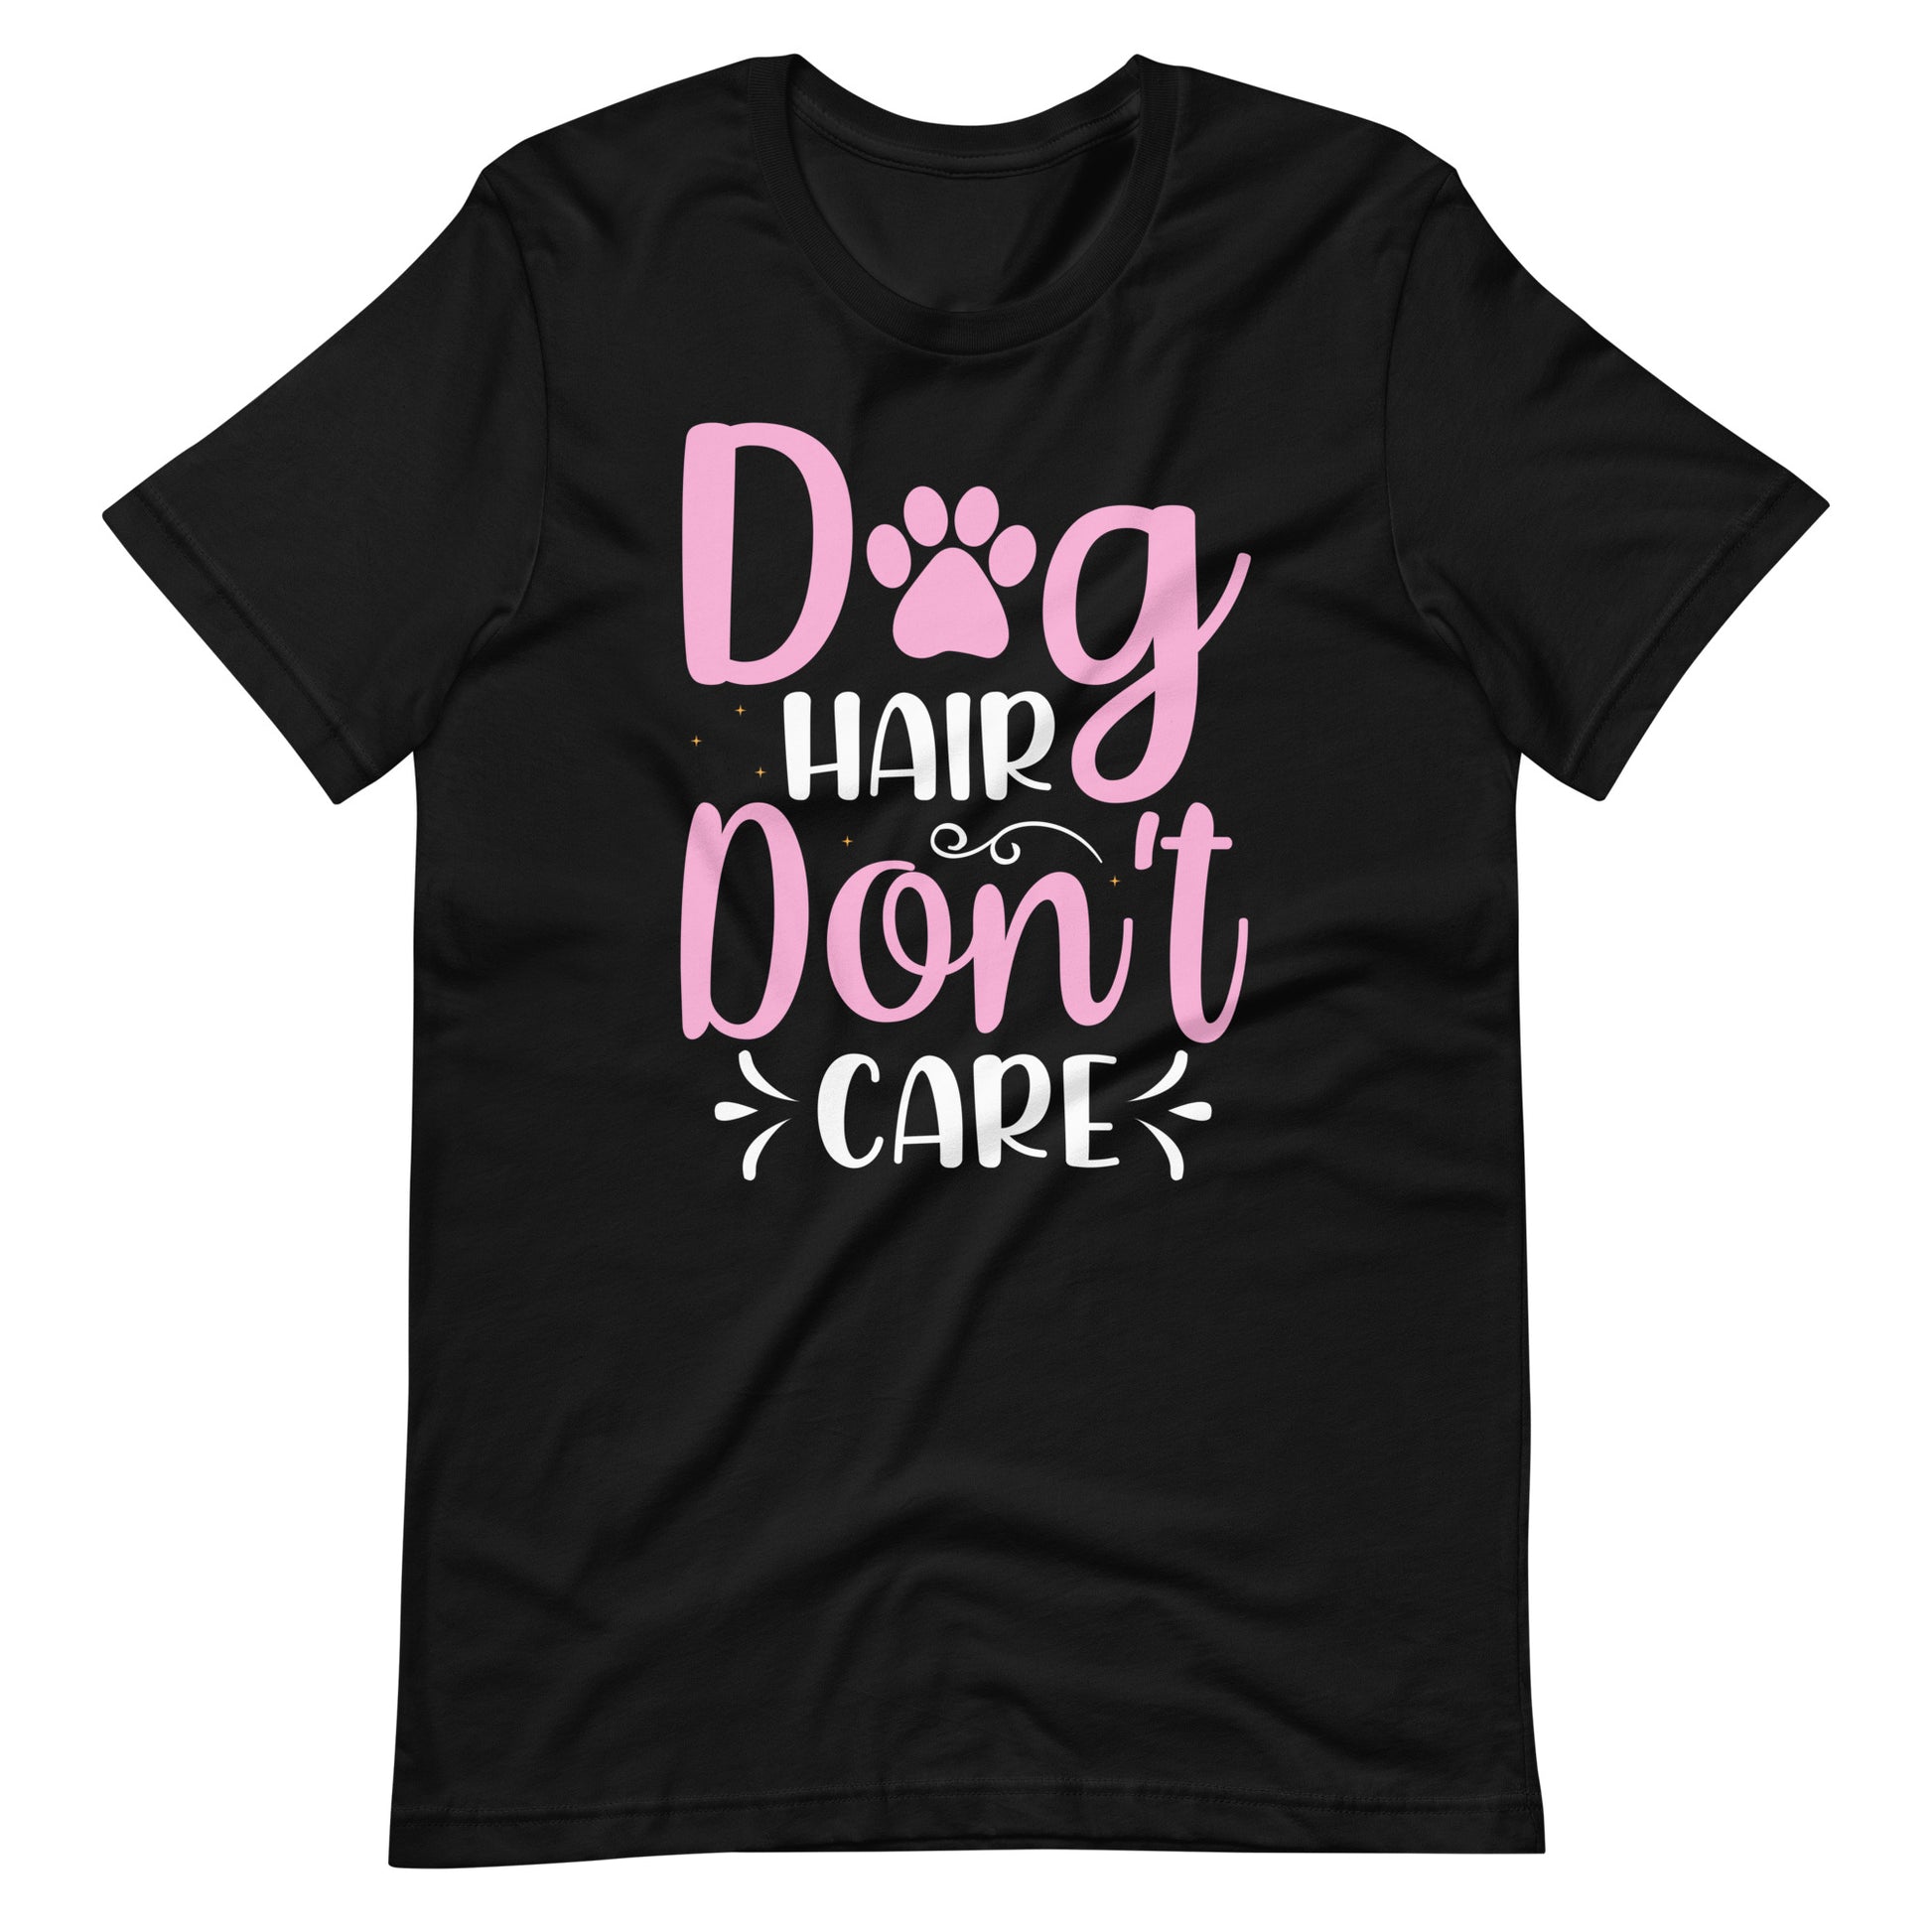 Dog Hair Don't Care T-Shirt for Dog Lovers